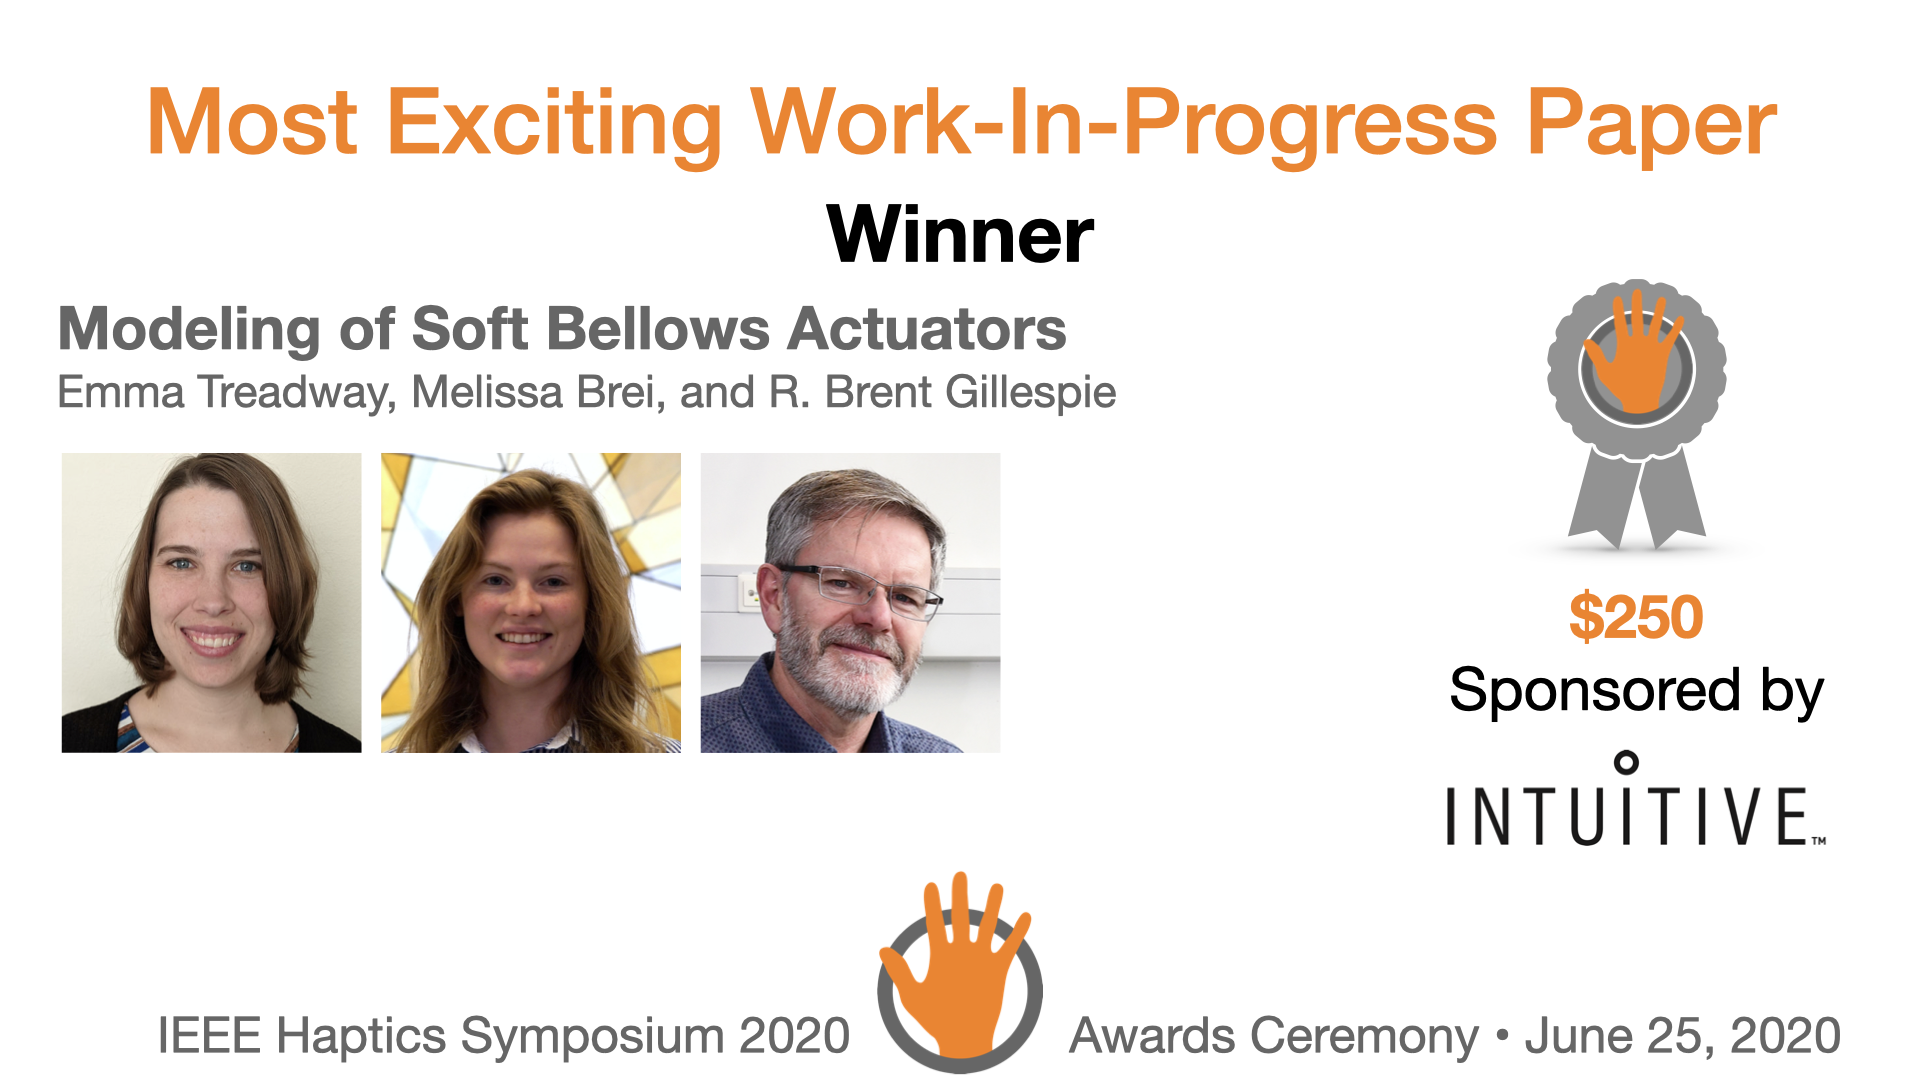 An award slide featuring the authors and sponsor